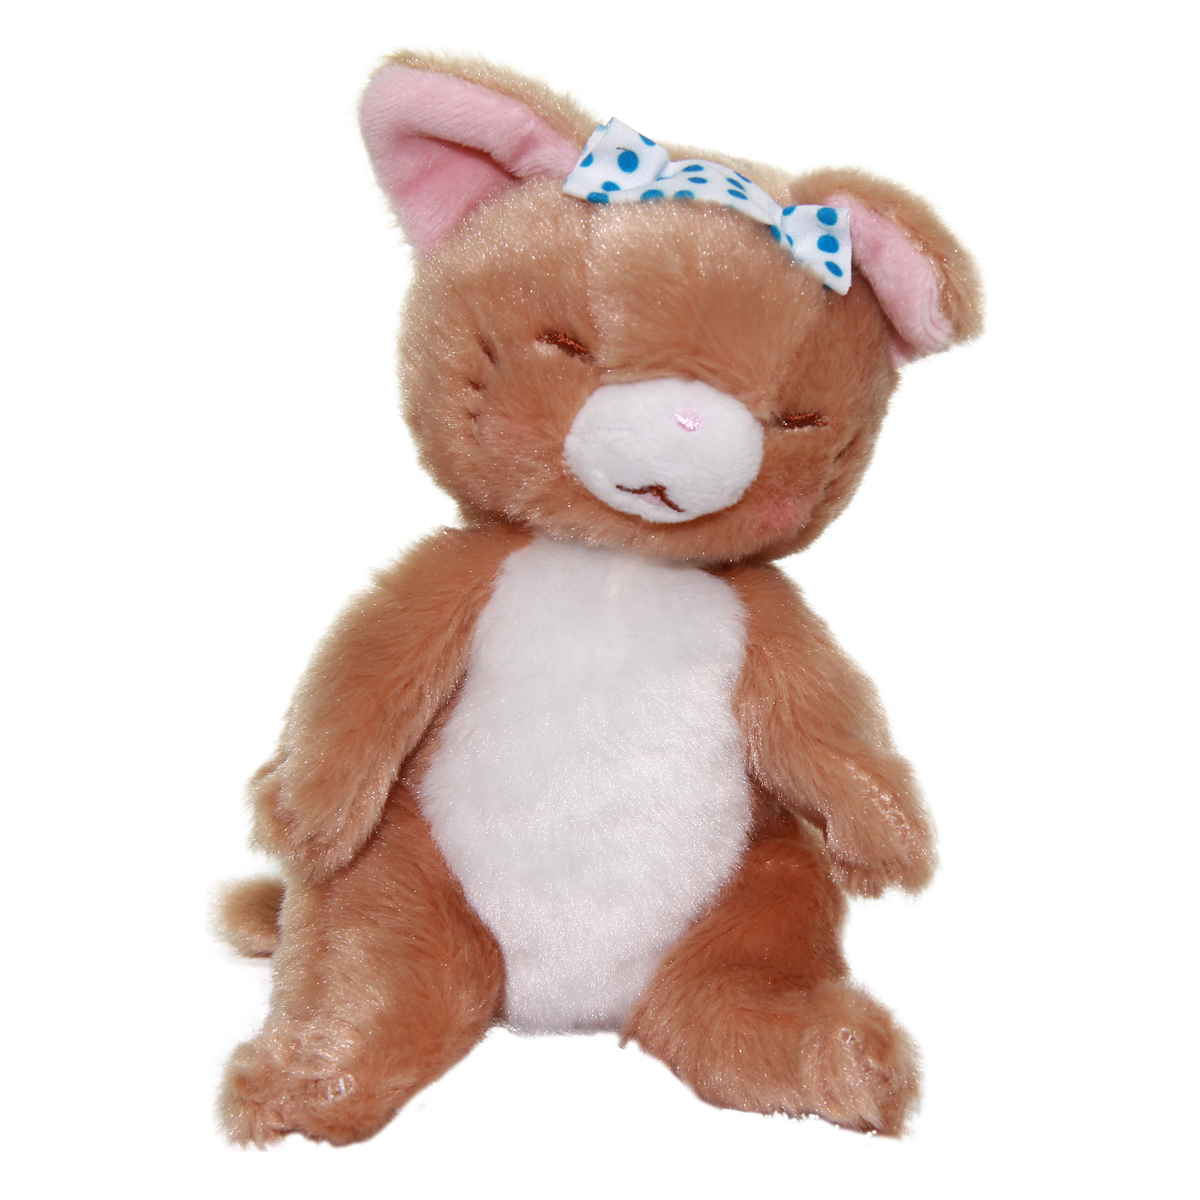 Cat Plush Doll, Hot Springs Collection, Stuffed Animal Toy, Light Brown, 6 Inches